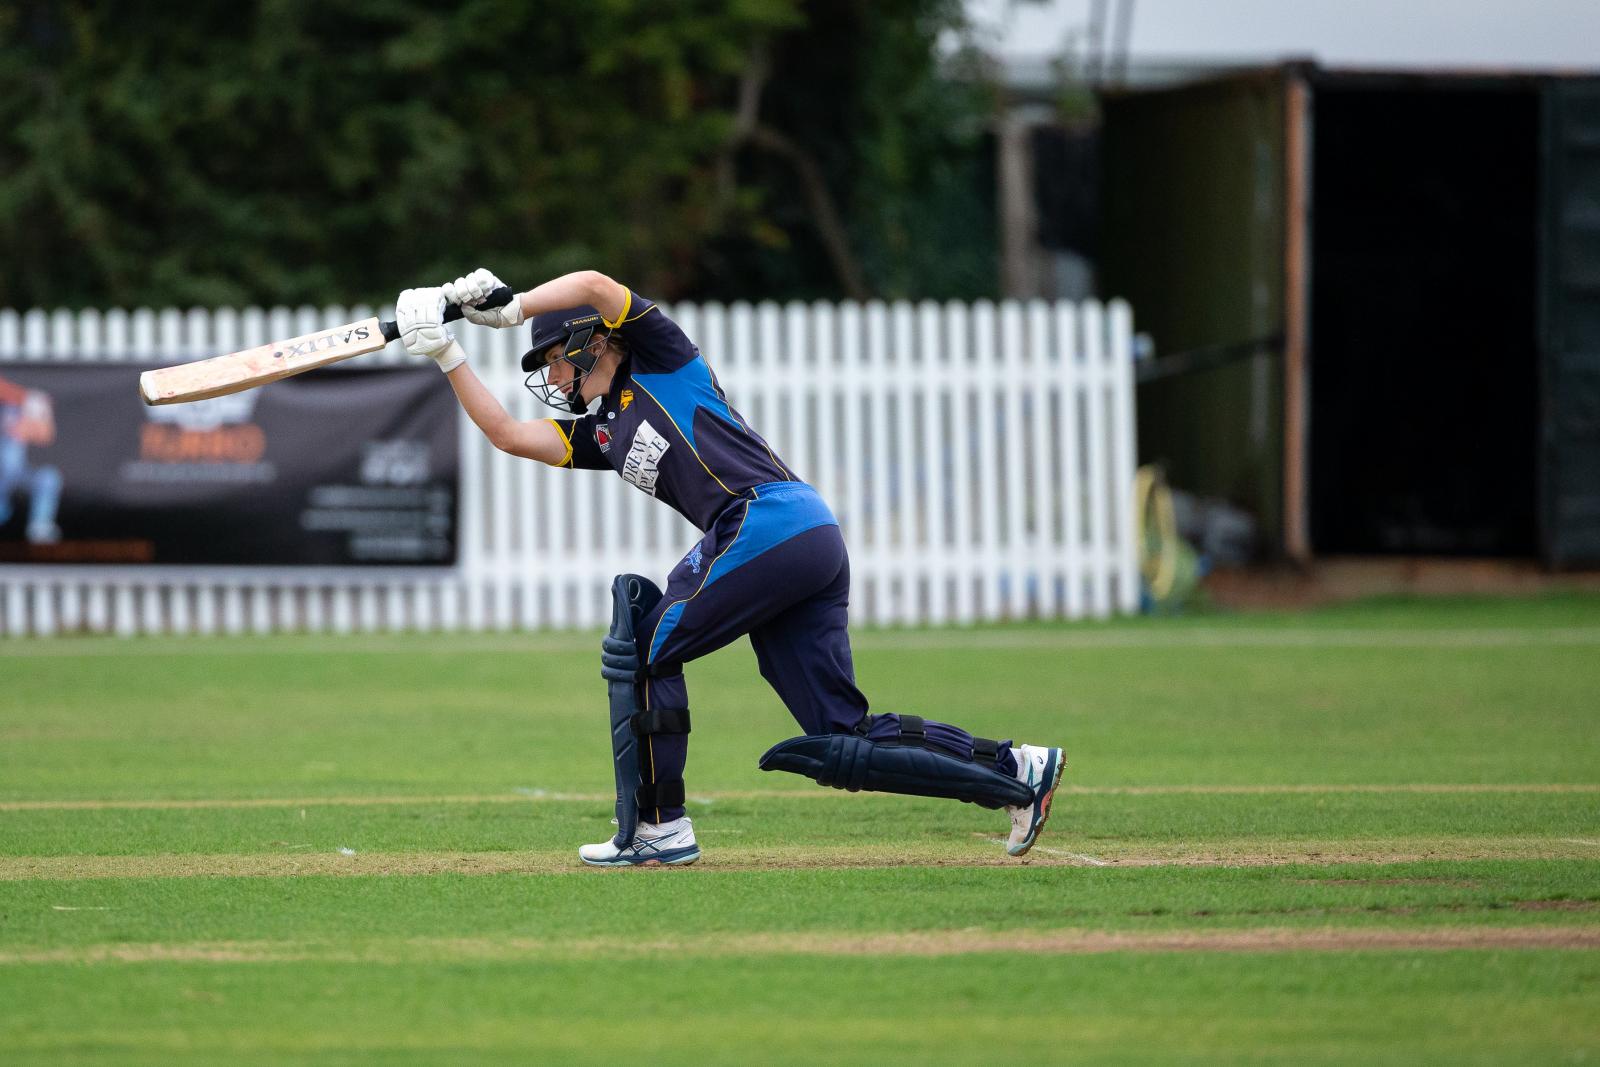 Emma Corney opened the batting for Devon Girls Under 18s at the ECB Royal London County Cup final.<br>credit: Mark Lockett